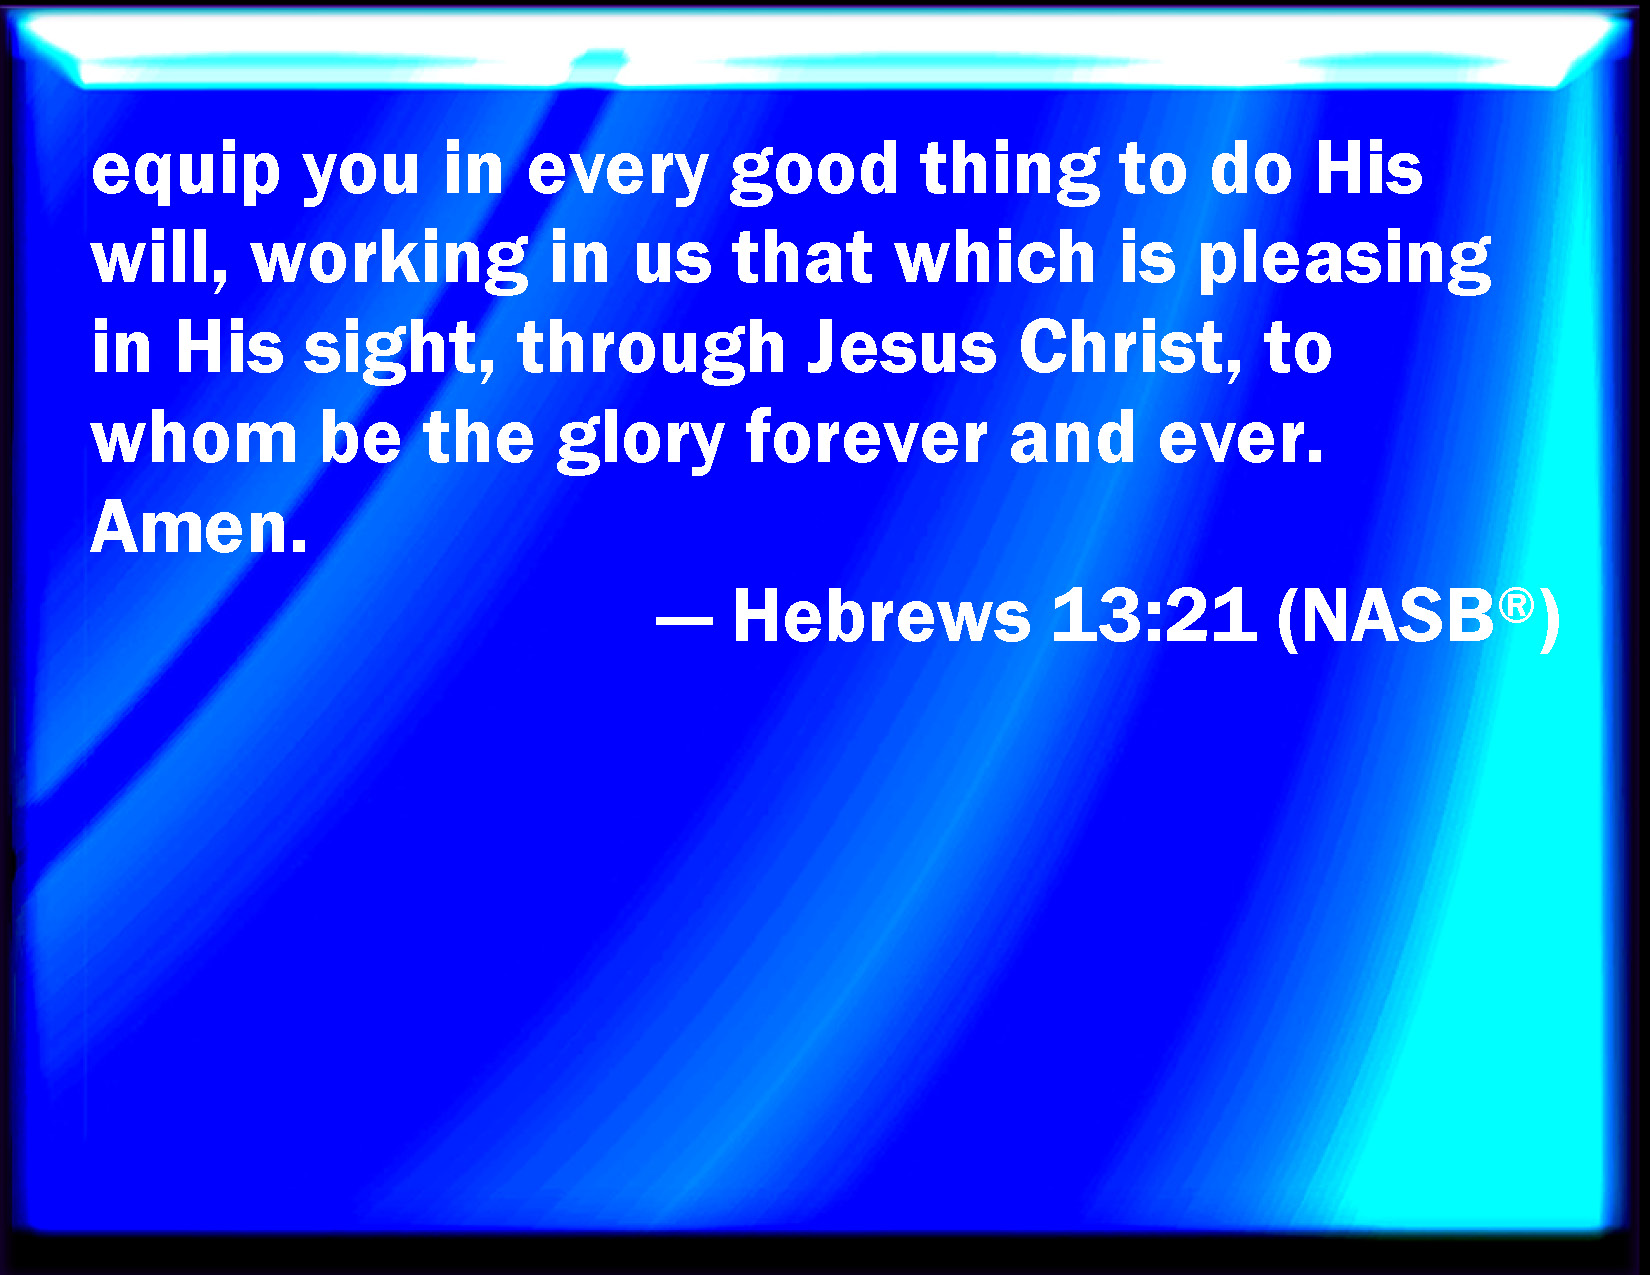 Hebrews 13 21 Make You Perfect In Every Good Work To Do His Will Working In You That Which Is Well Pleasing In His Sight Through Jesus Christ To Whom Be Glory For